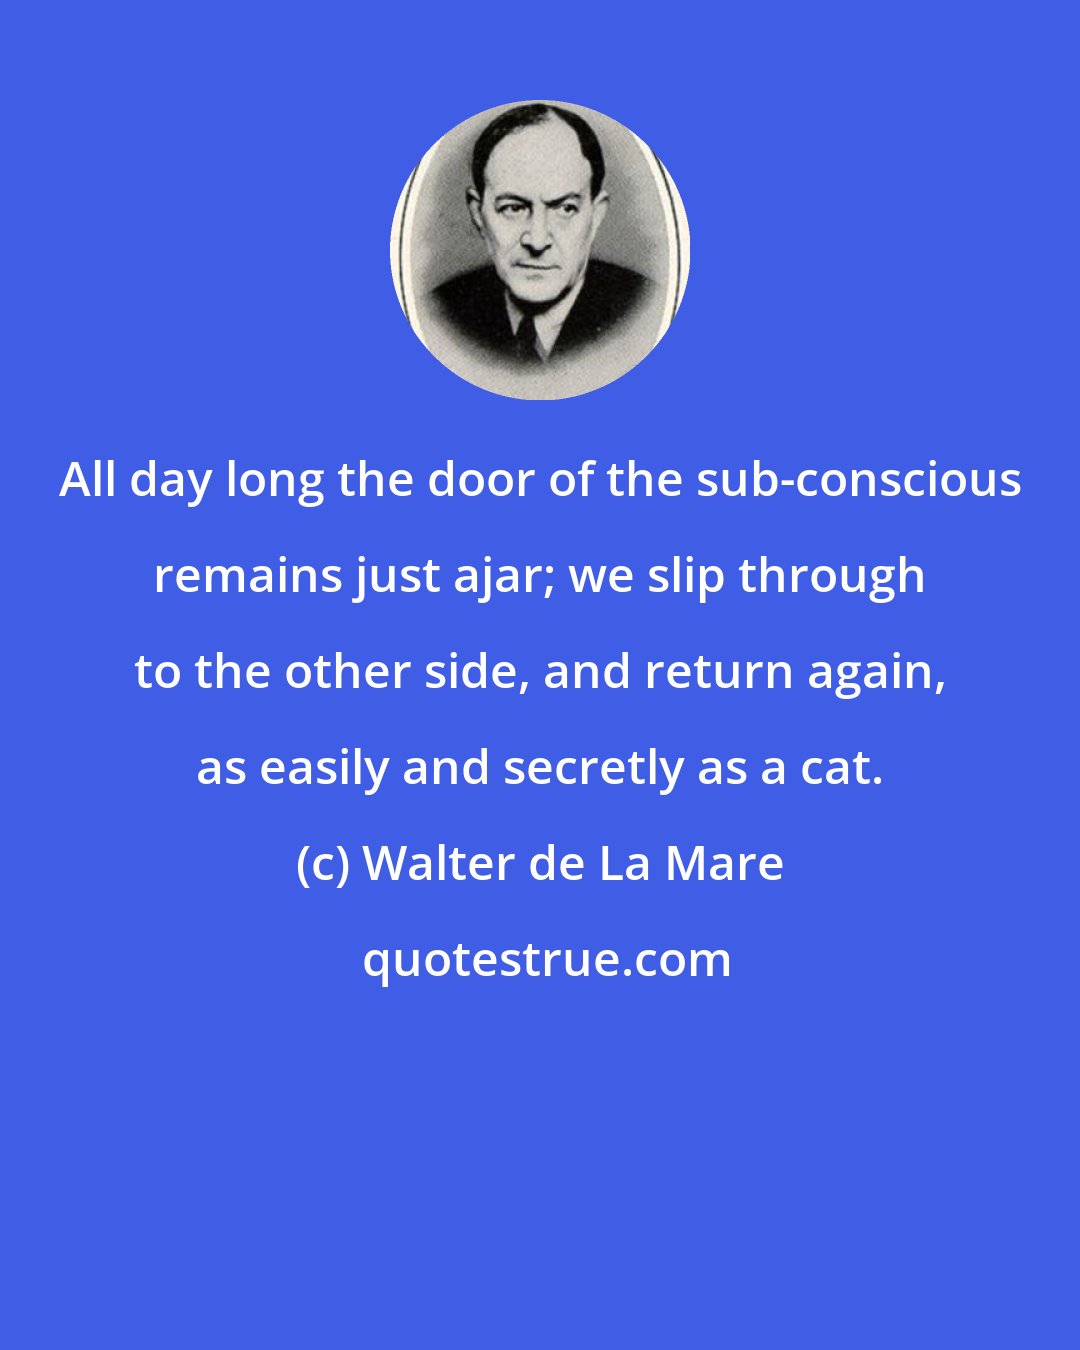 Walter de La Mare: All day long the door of the sub-conscious remains just ajar; we slip through to the other side, and return again, as easily and secretly as a cat.